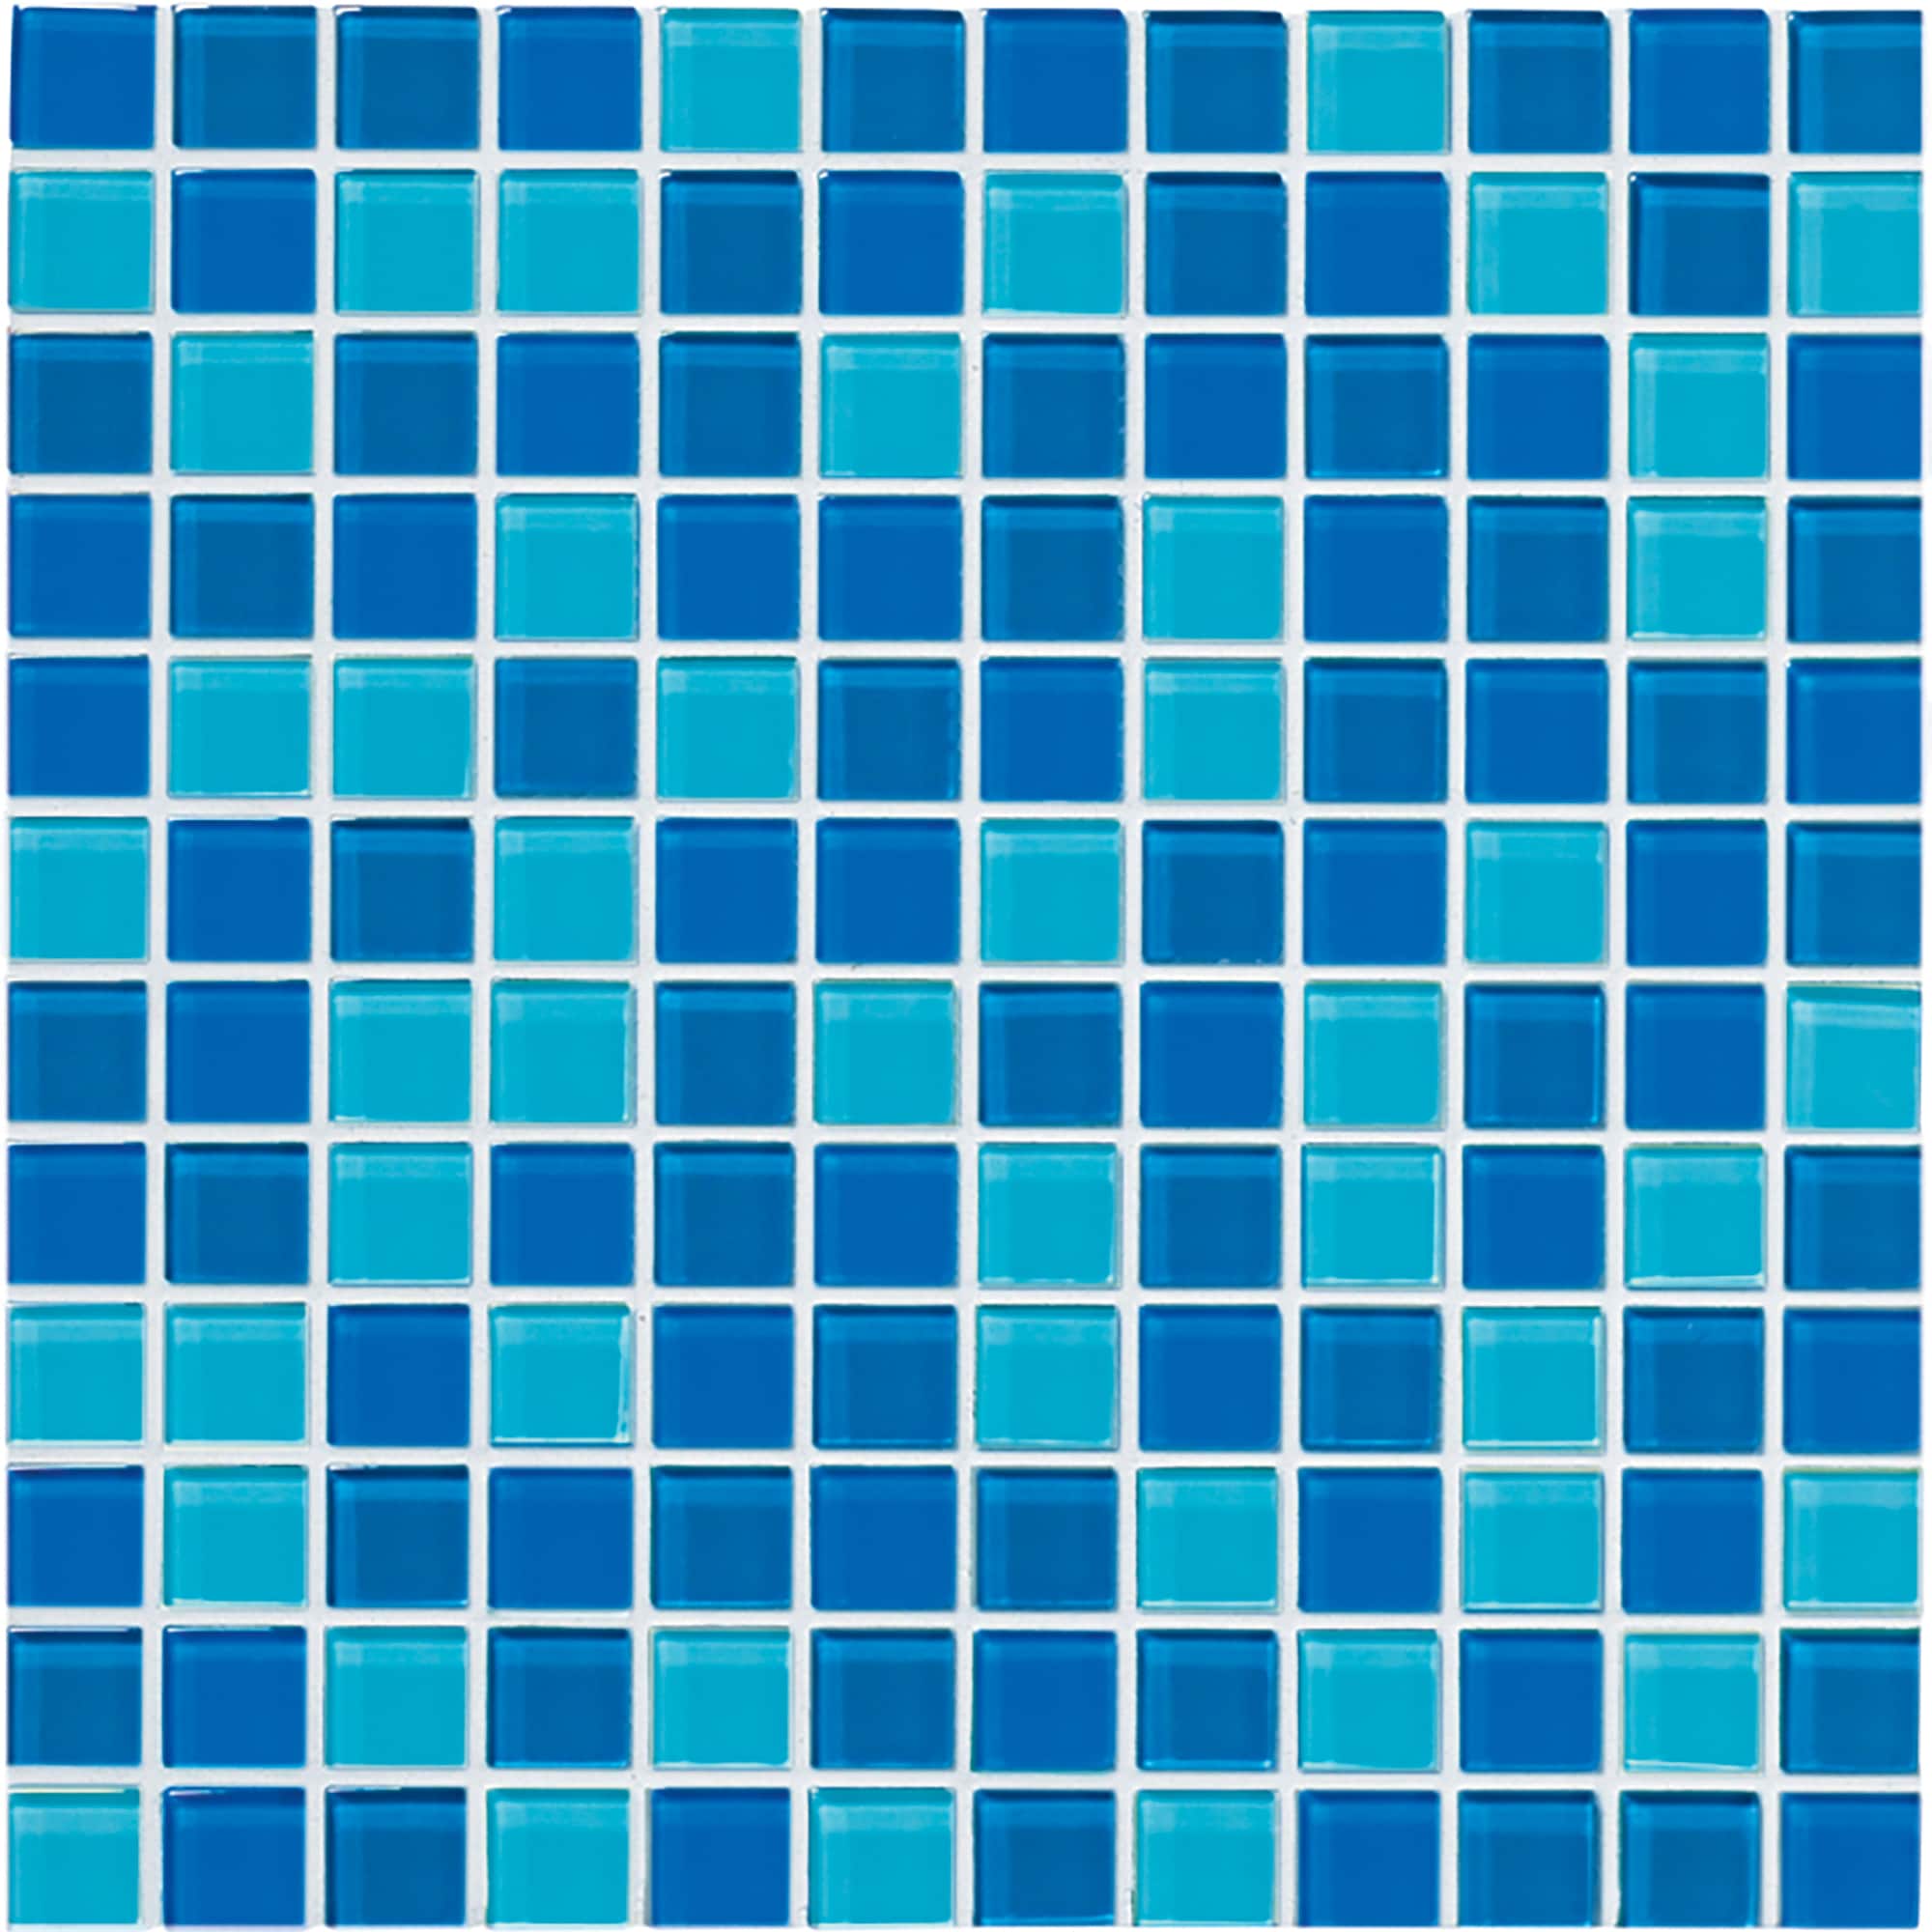 Crossville High Fidelity Turquoise/Sea/Royal Blue 4x4 Swatch 1x1 Mosaic Blend | 1X1LW.GB07